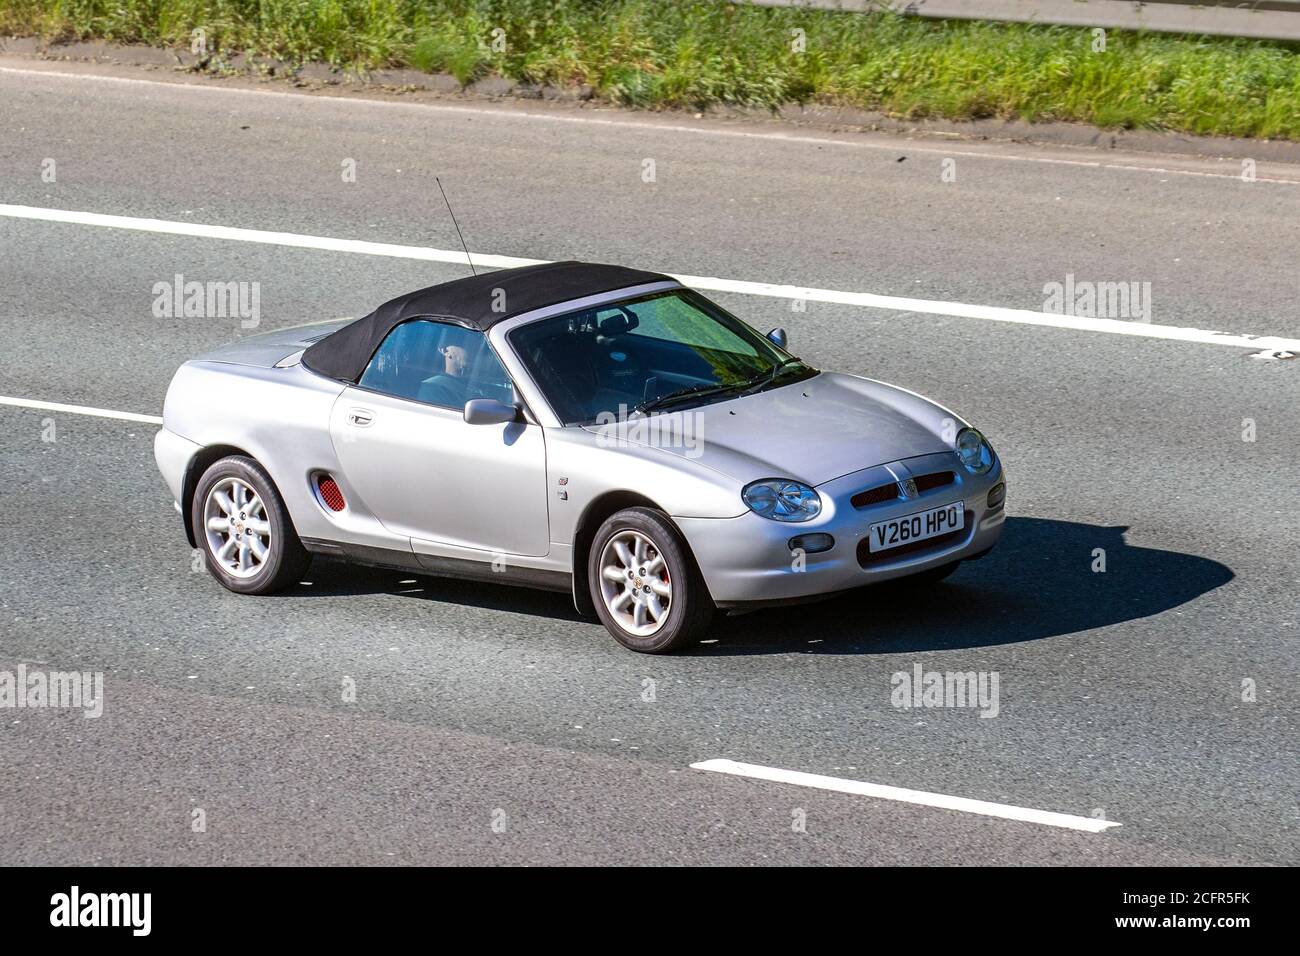 2000 silver 2dr MG MGF roadster ; Vehicular traffic moving vehicles, cars driving vehicle on UK roads, motors, motoring on the M6 motorway highway network. Stock Photo